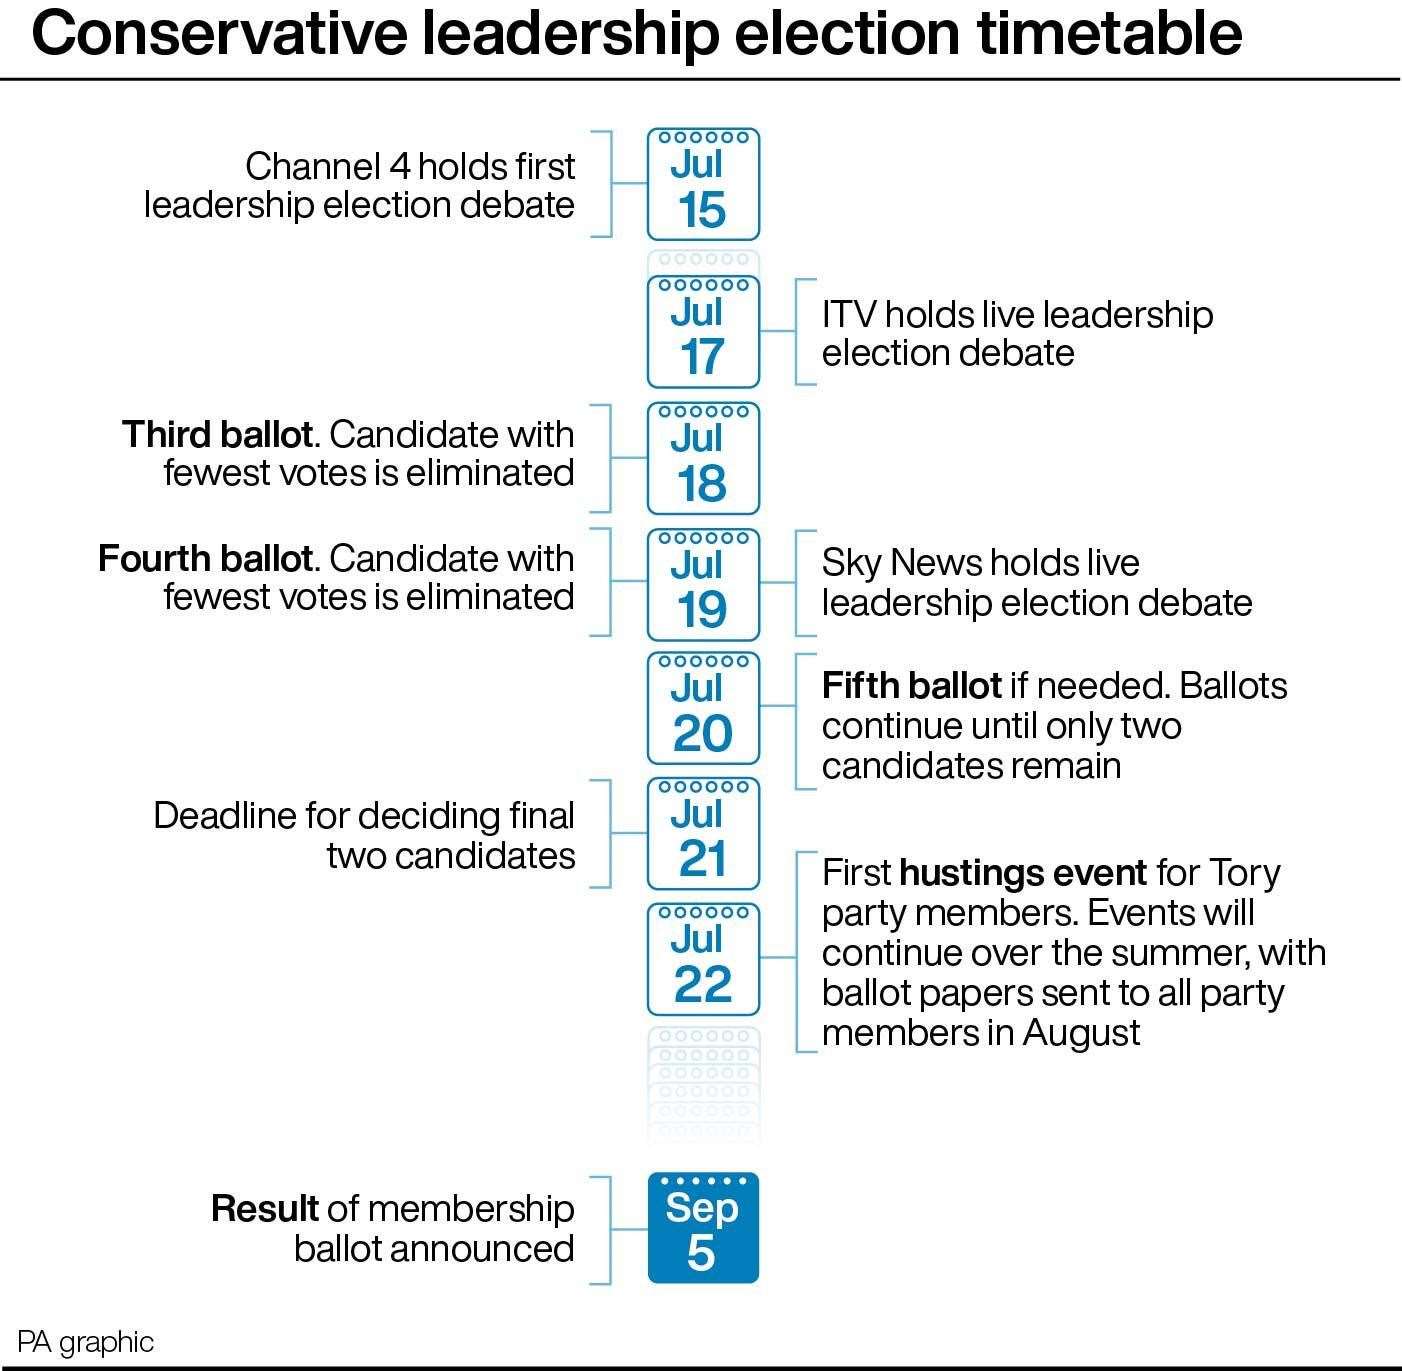 Conservative leadership election timetable. Infographic from PA Graphics.